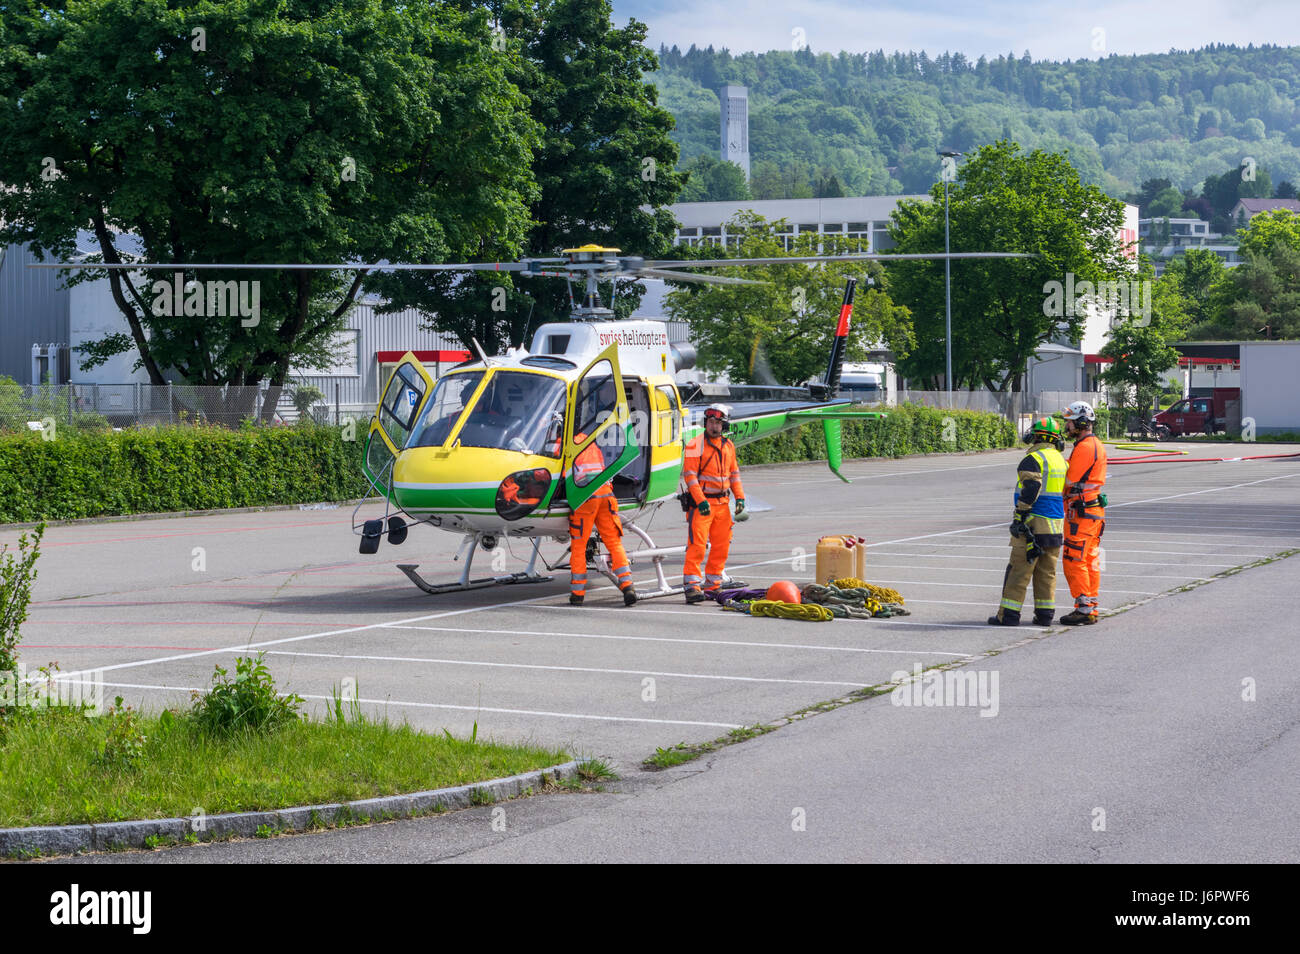 Aérospatiale/Eurocopter AS350 B3 'Écureuil' (Airbus Helicopters H125) on a parking lot, being prepared by personnel for underslung cargo transport. Stock Photo